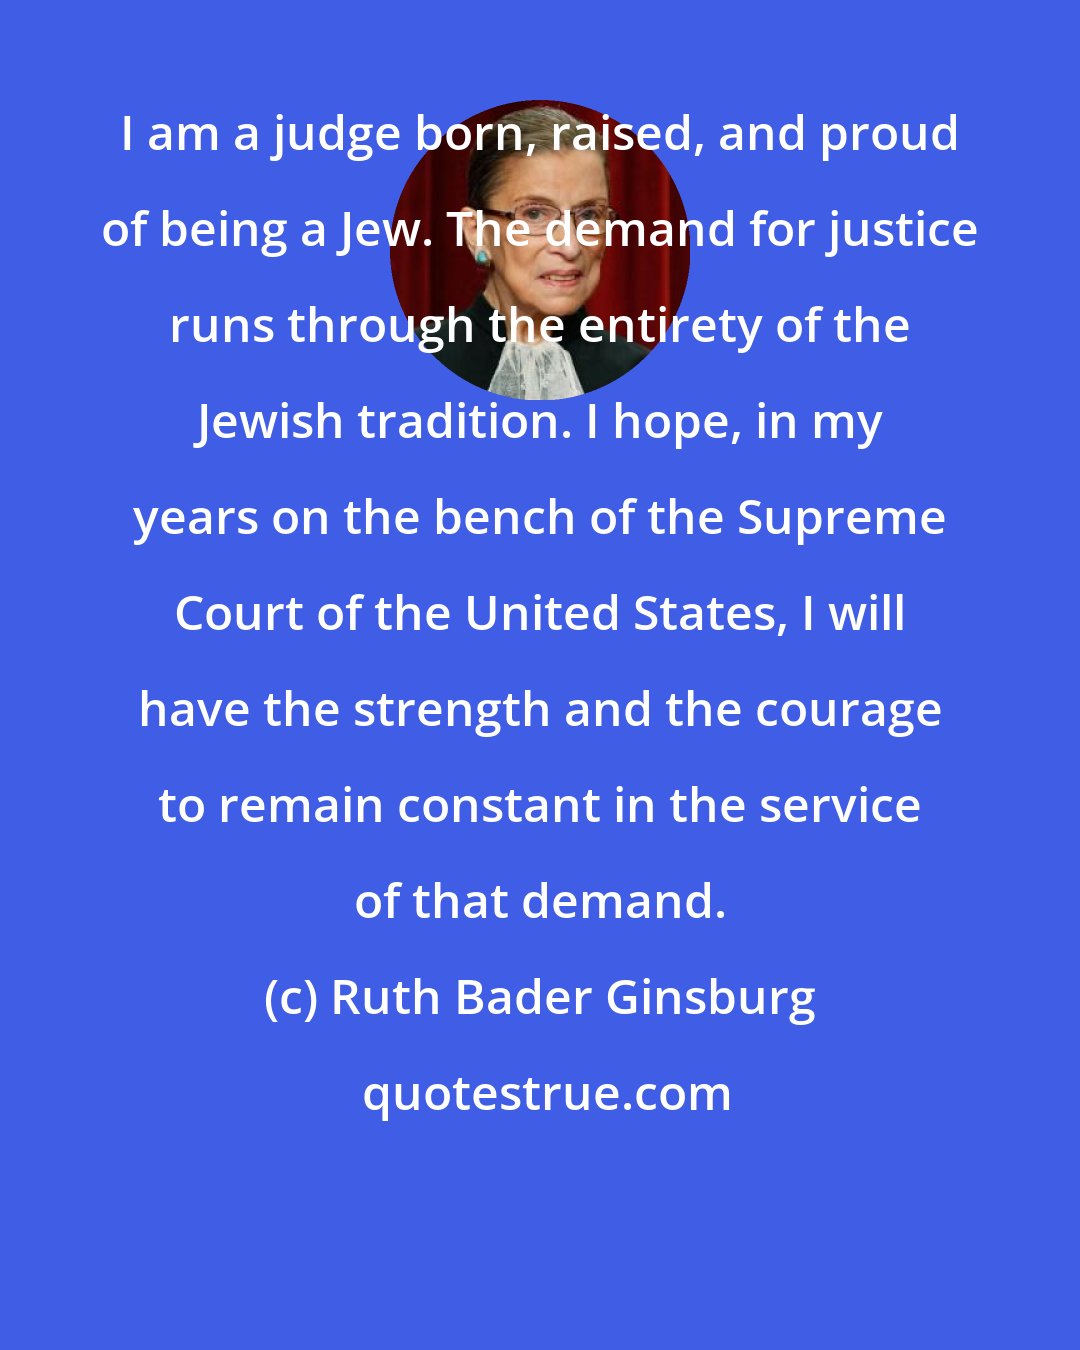 Ruth Bader Ginsburg: I am a judge born, raised, and proud of being a Jew. The demand for justice runs through the entirety of the Jewish tradition. I hope, in my years on the bench of the Supreme Court of the United States, I will have the strength and the courage to remain constant in the service of that demand.